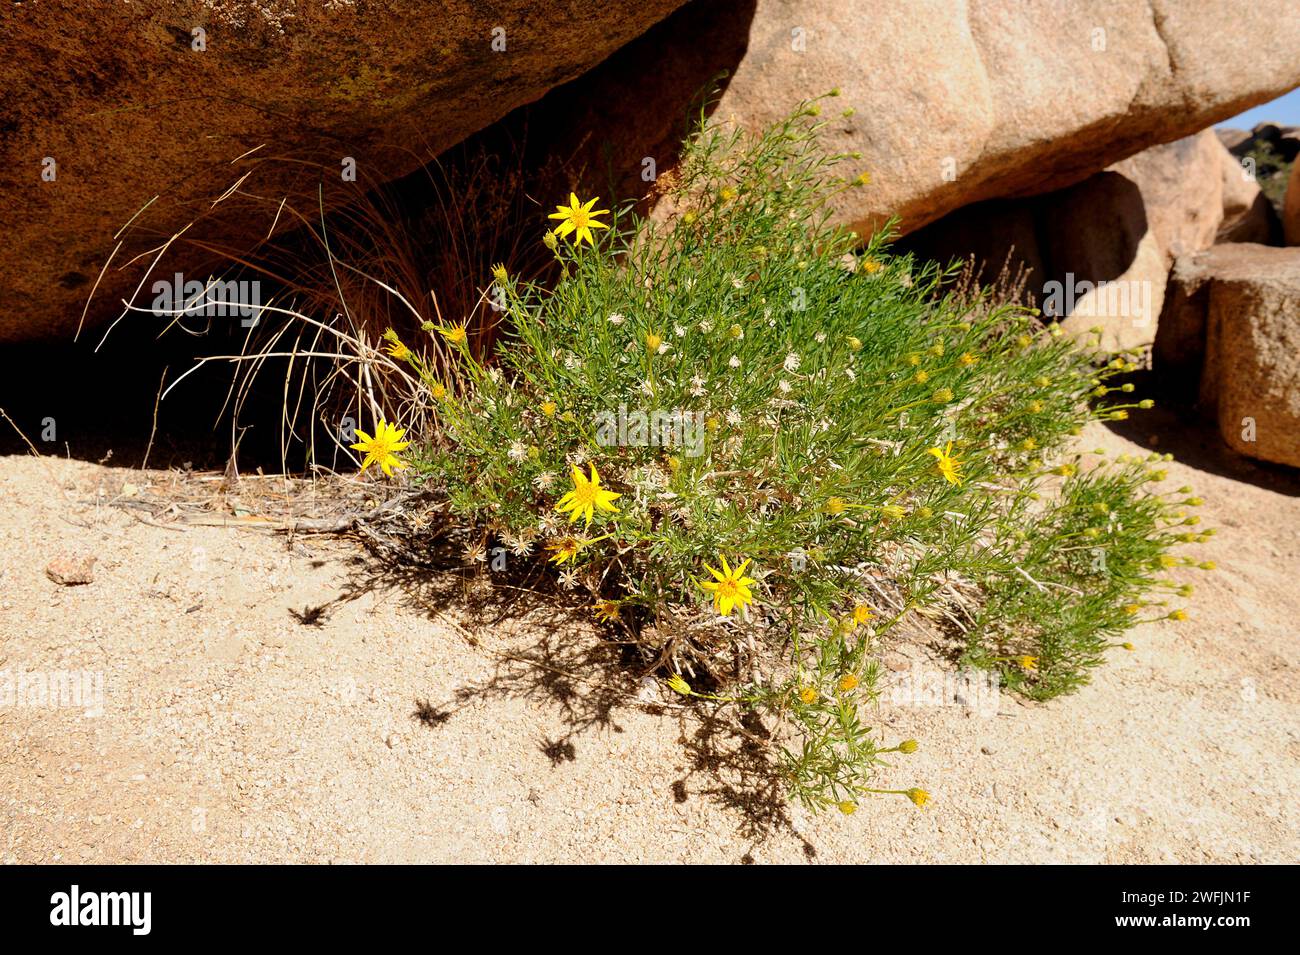 Cinchweed or limoncillo (Pectis papposa) is an annual herb native to southwestern USA and northern Mexico. This photo was taken in Joshua Tree Nationa Stock Photo